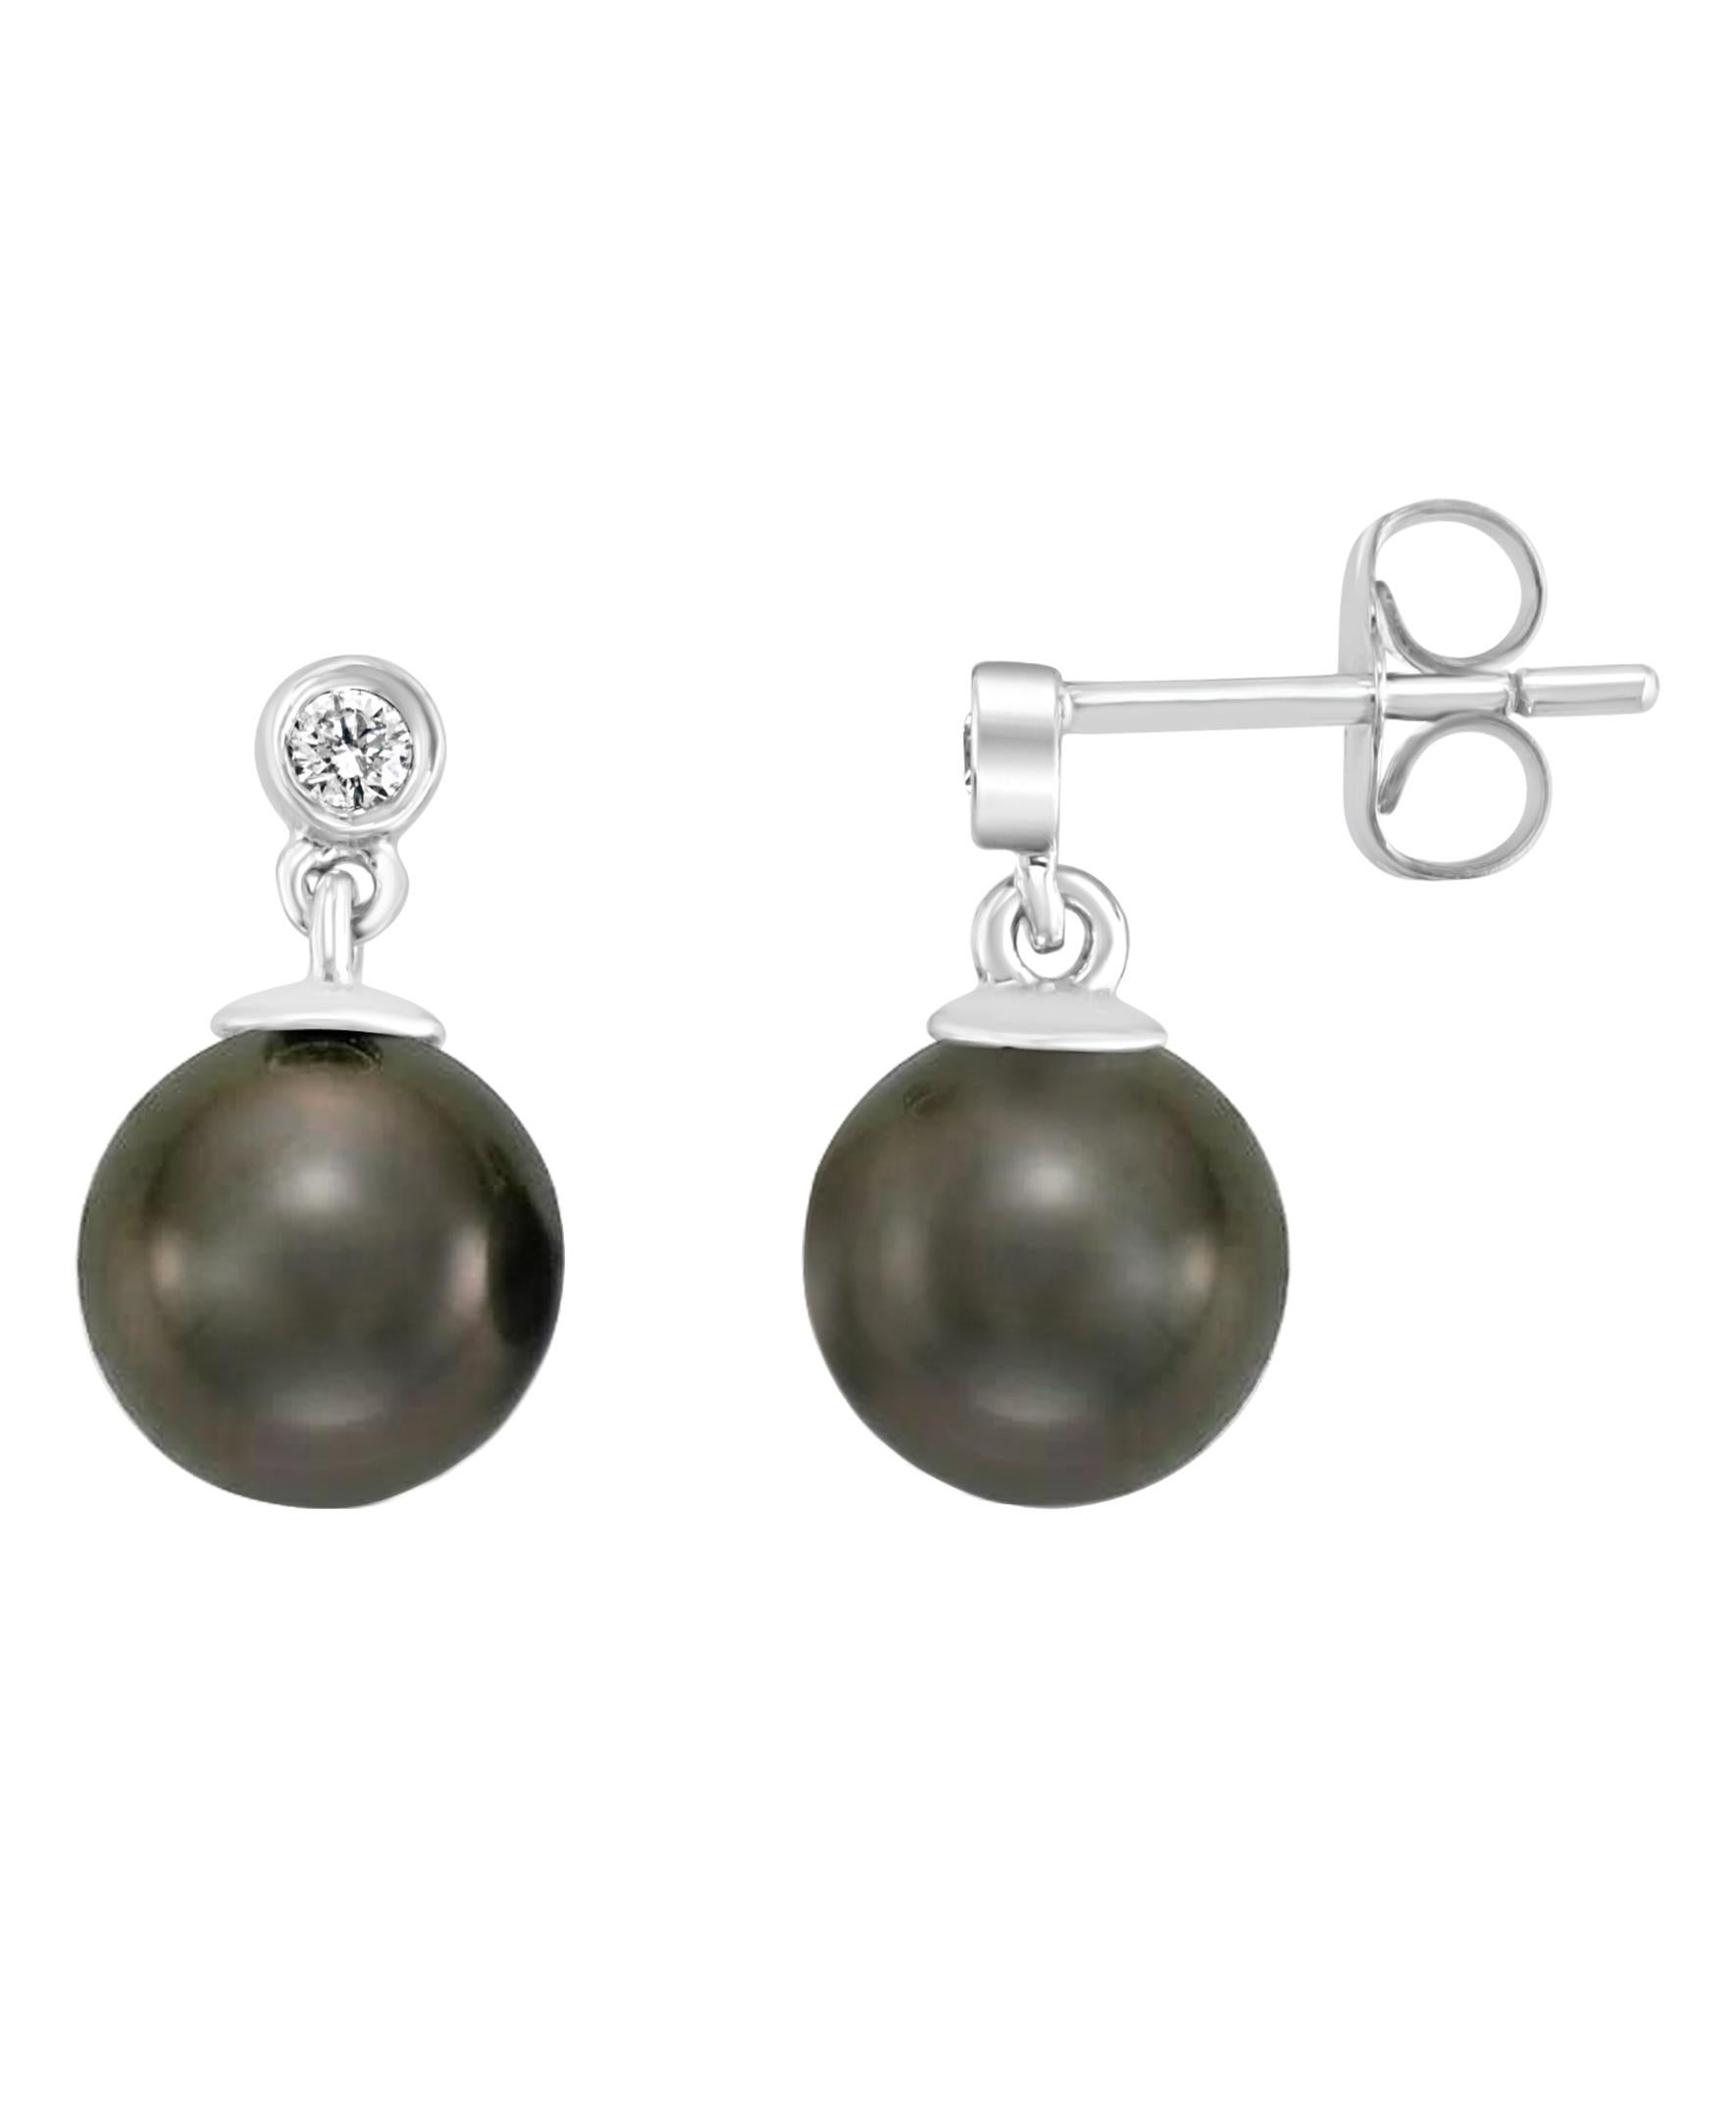 These exquisite 14 karat white gold earrings feature South Sea Tahitian round 7-8mm pearls. The pearls are set beneath 0.06 carats of diamonds. 
Perfect for weddings, anniversaries, birthdays and graduations. Symbolizing purity and transformation,